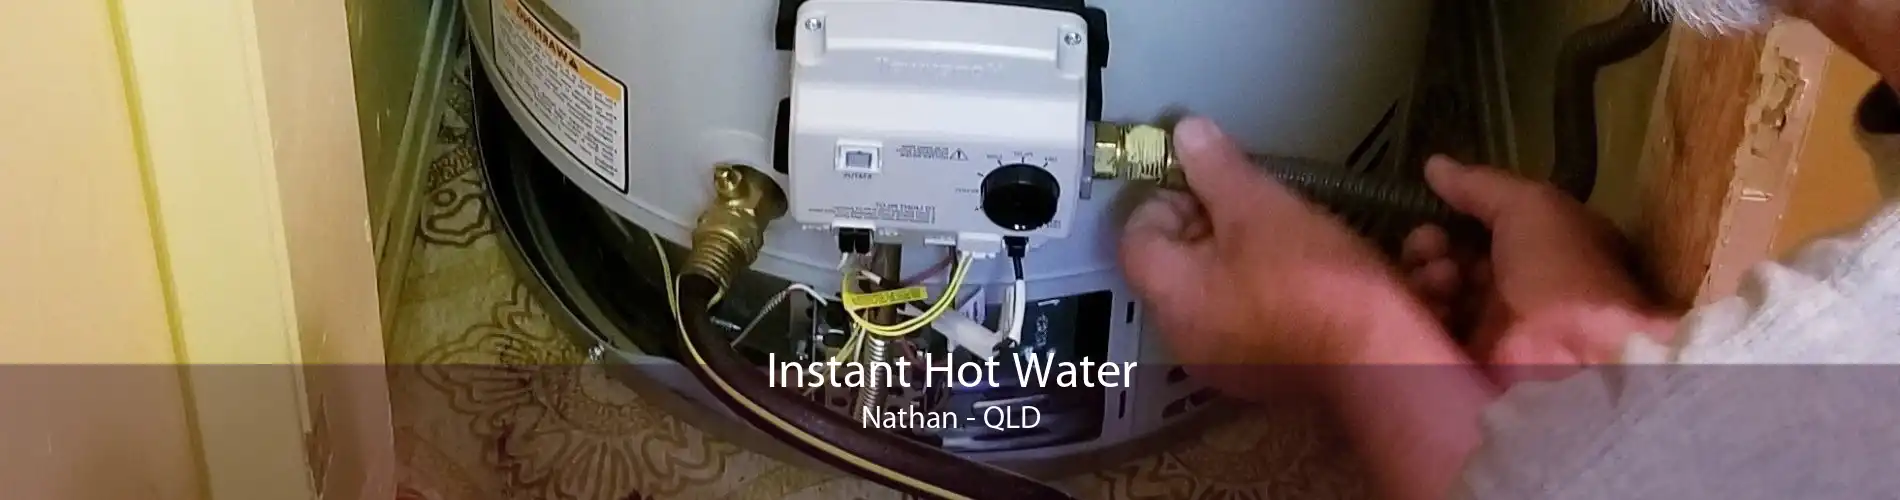 Instant Hot Water Nathan - QLD